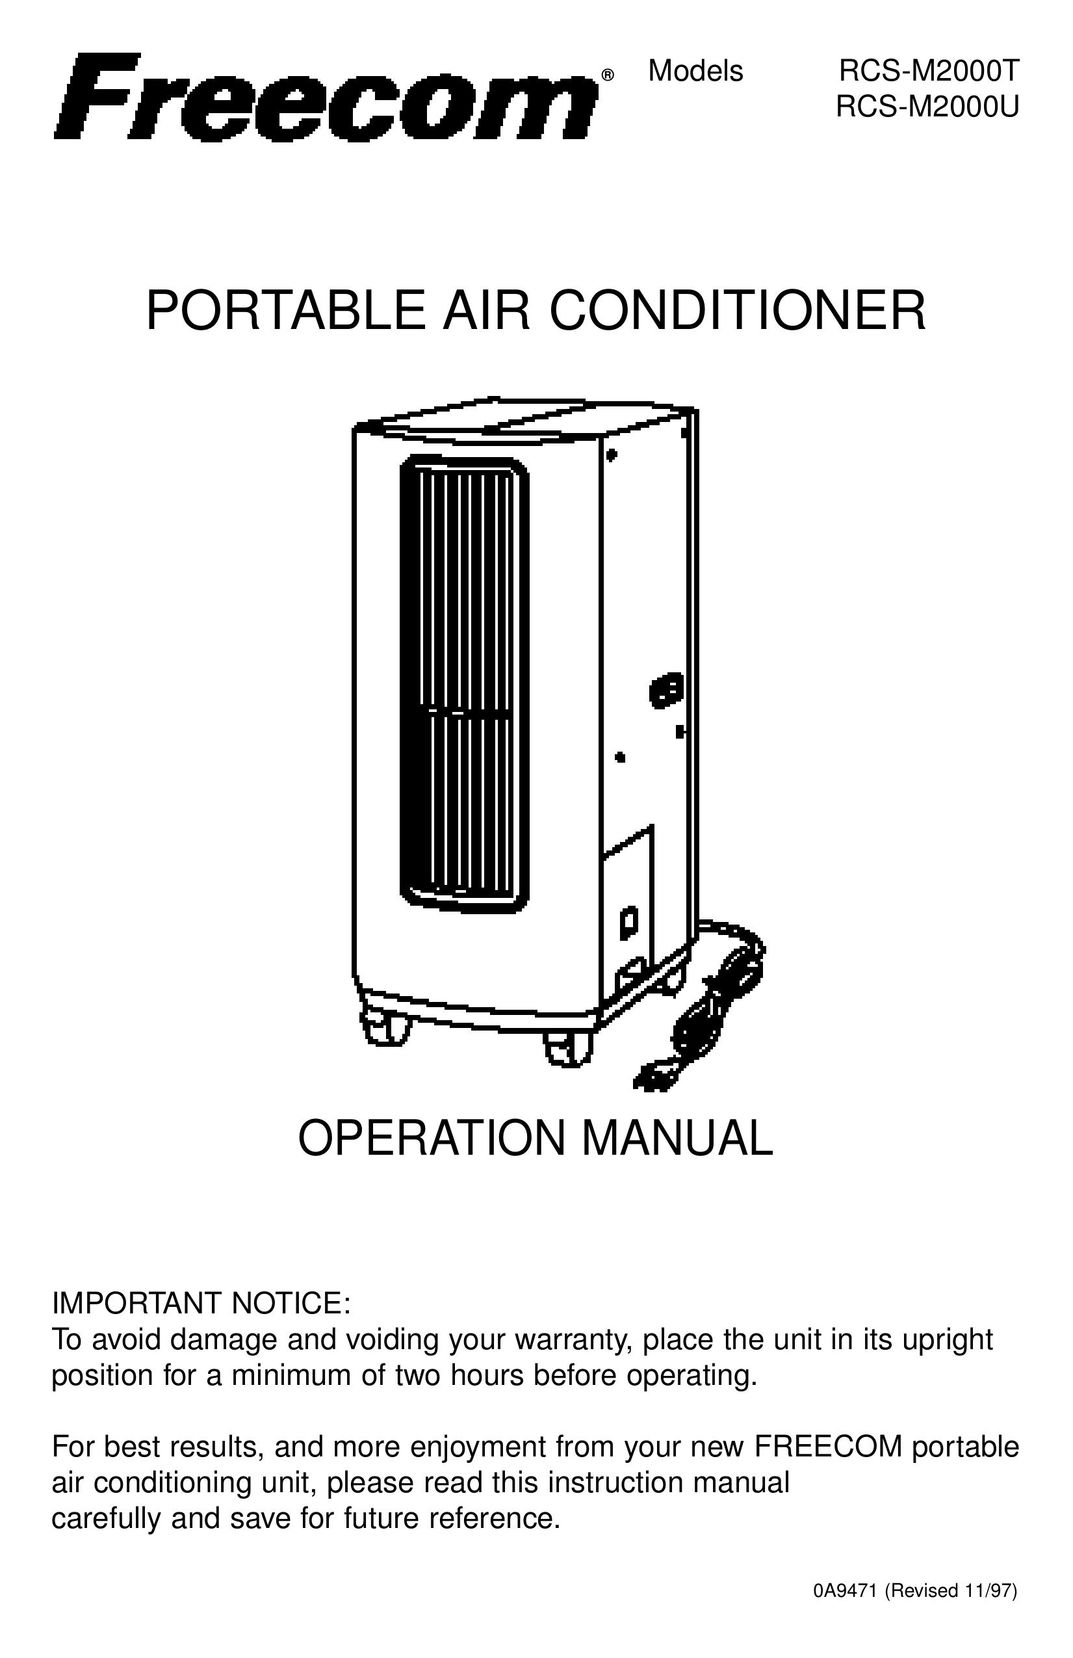 Freecom Technologies RCS-M2000T Air Conditioner User Manual (Page 1)